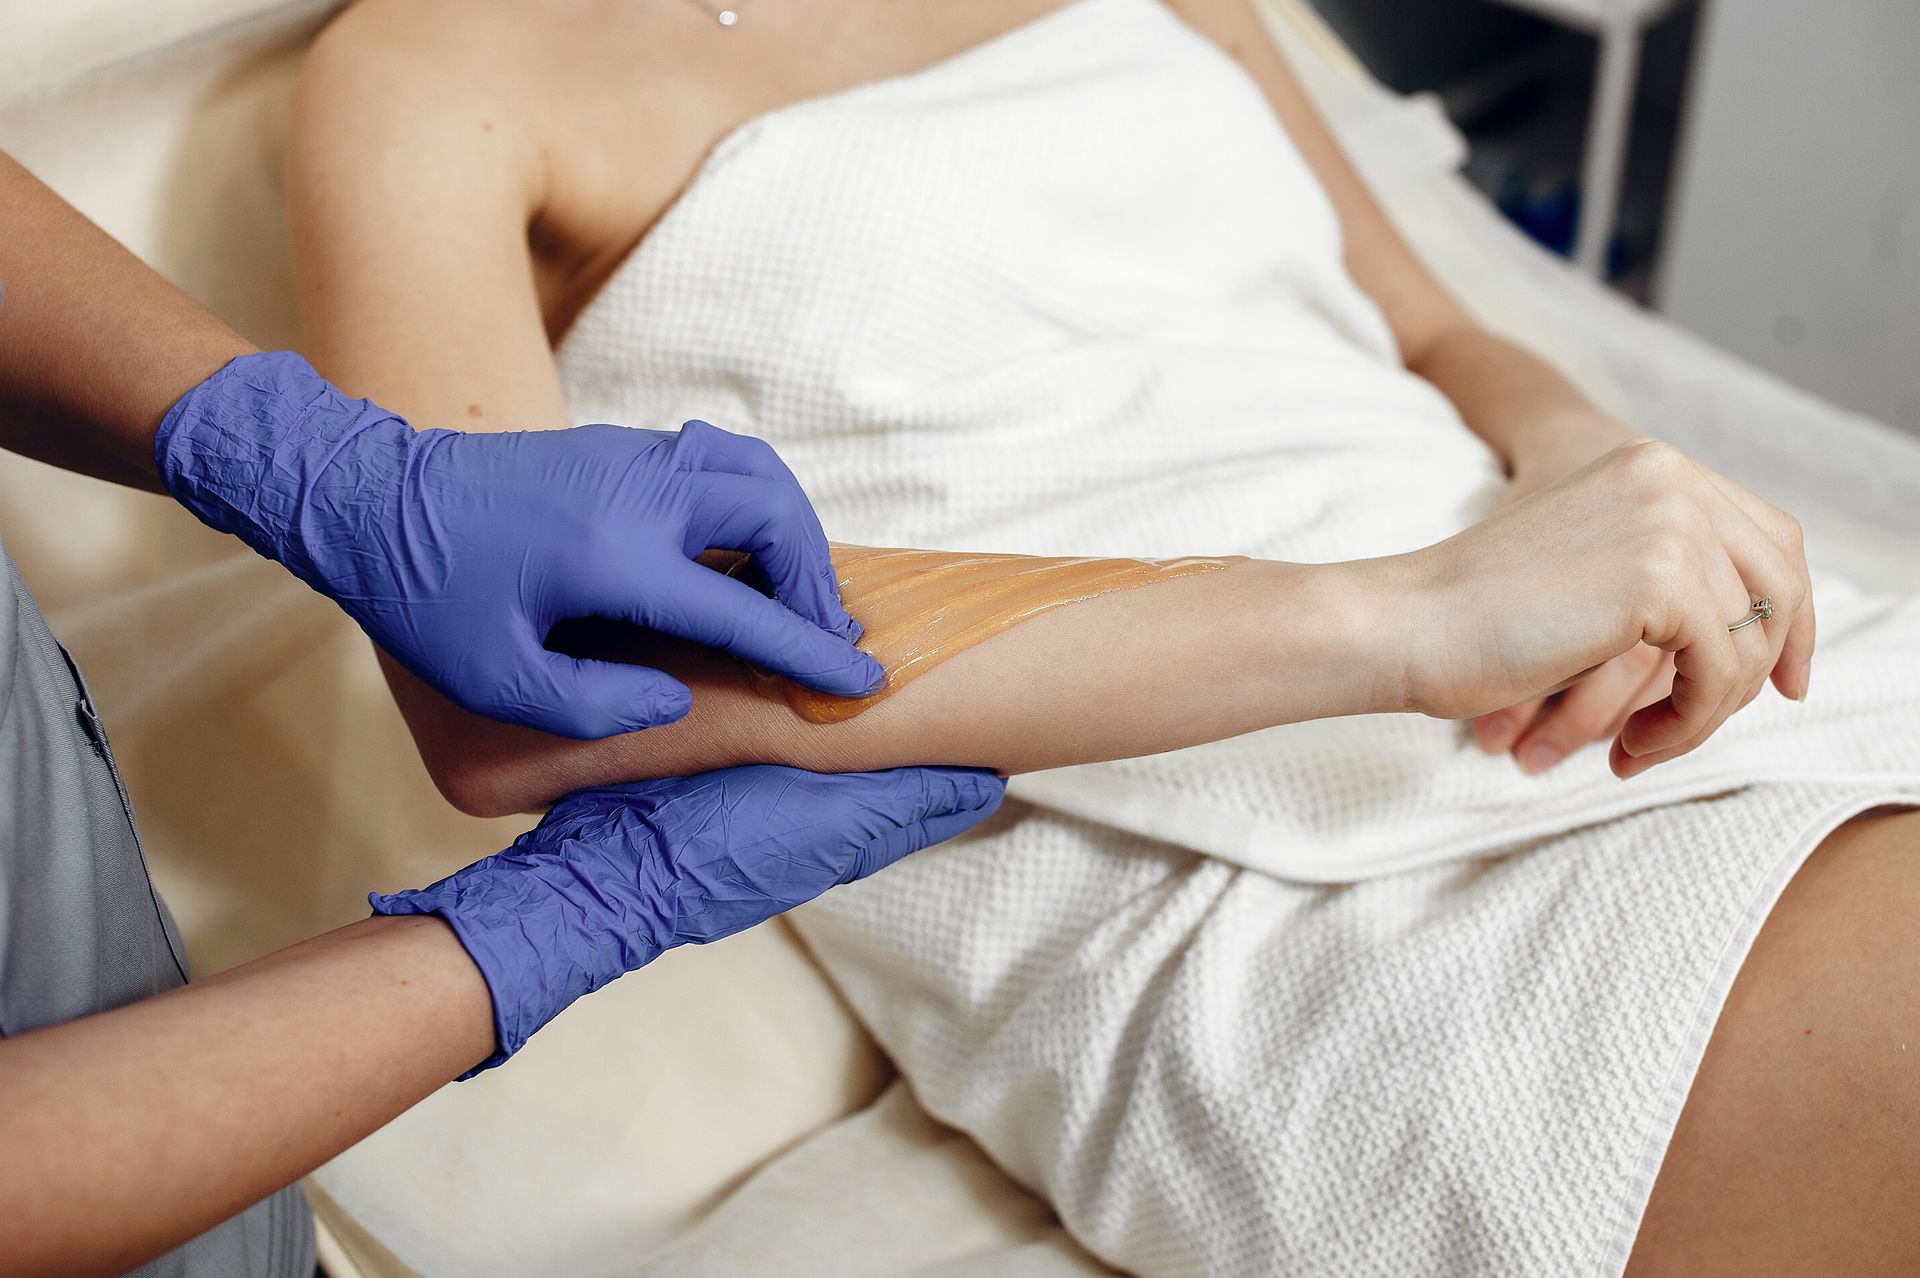 a woman is getting her arm waxed by a woman wearing blue gloves .